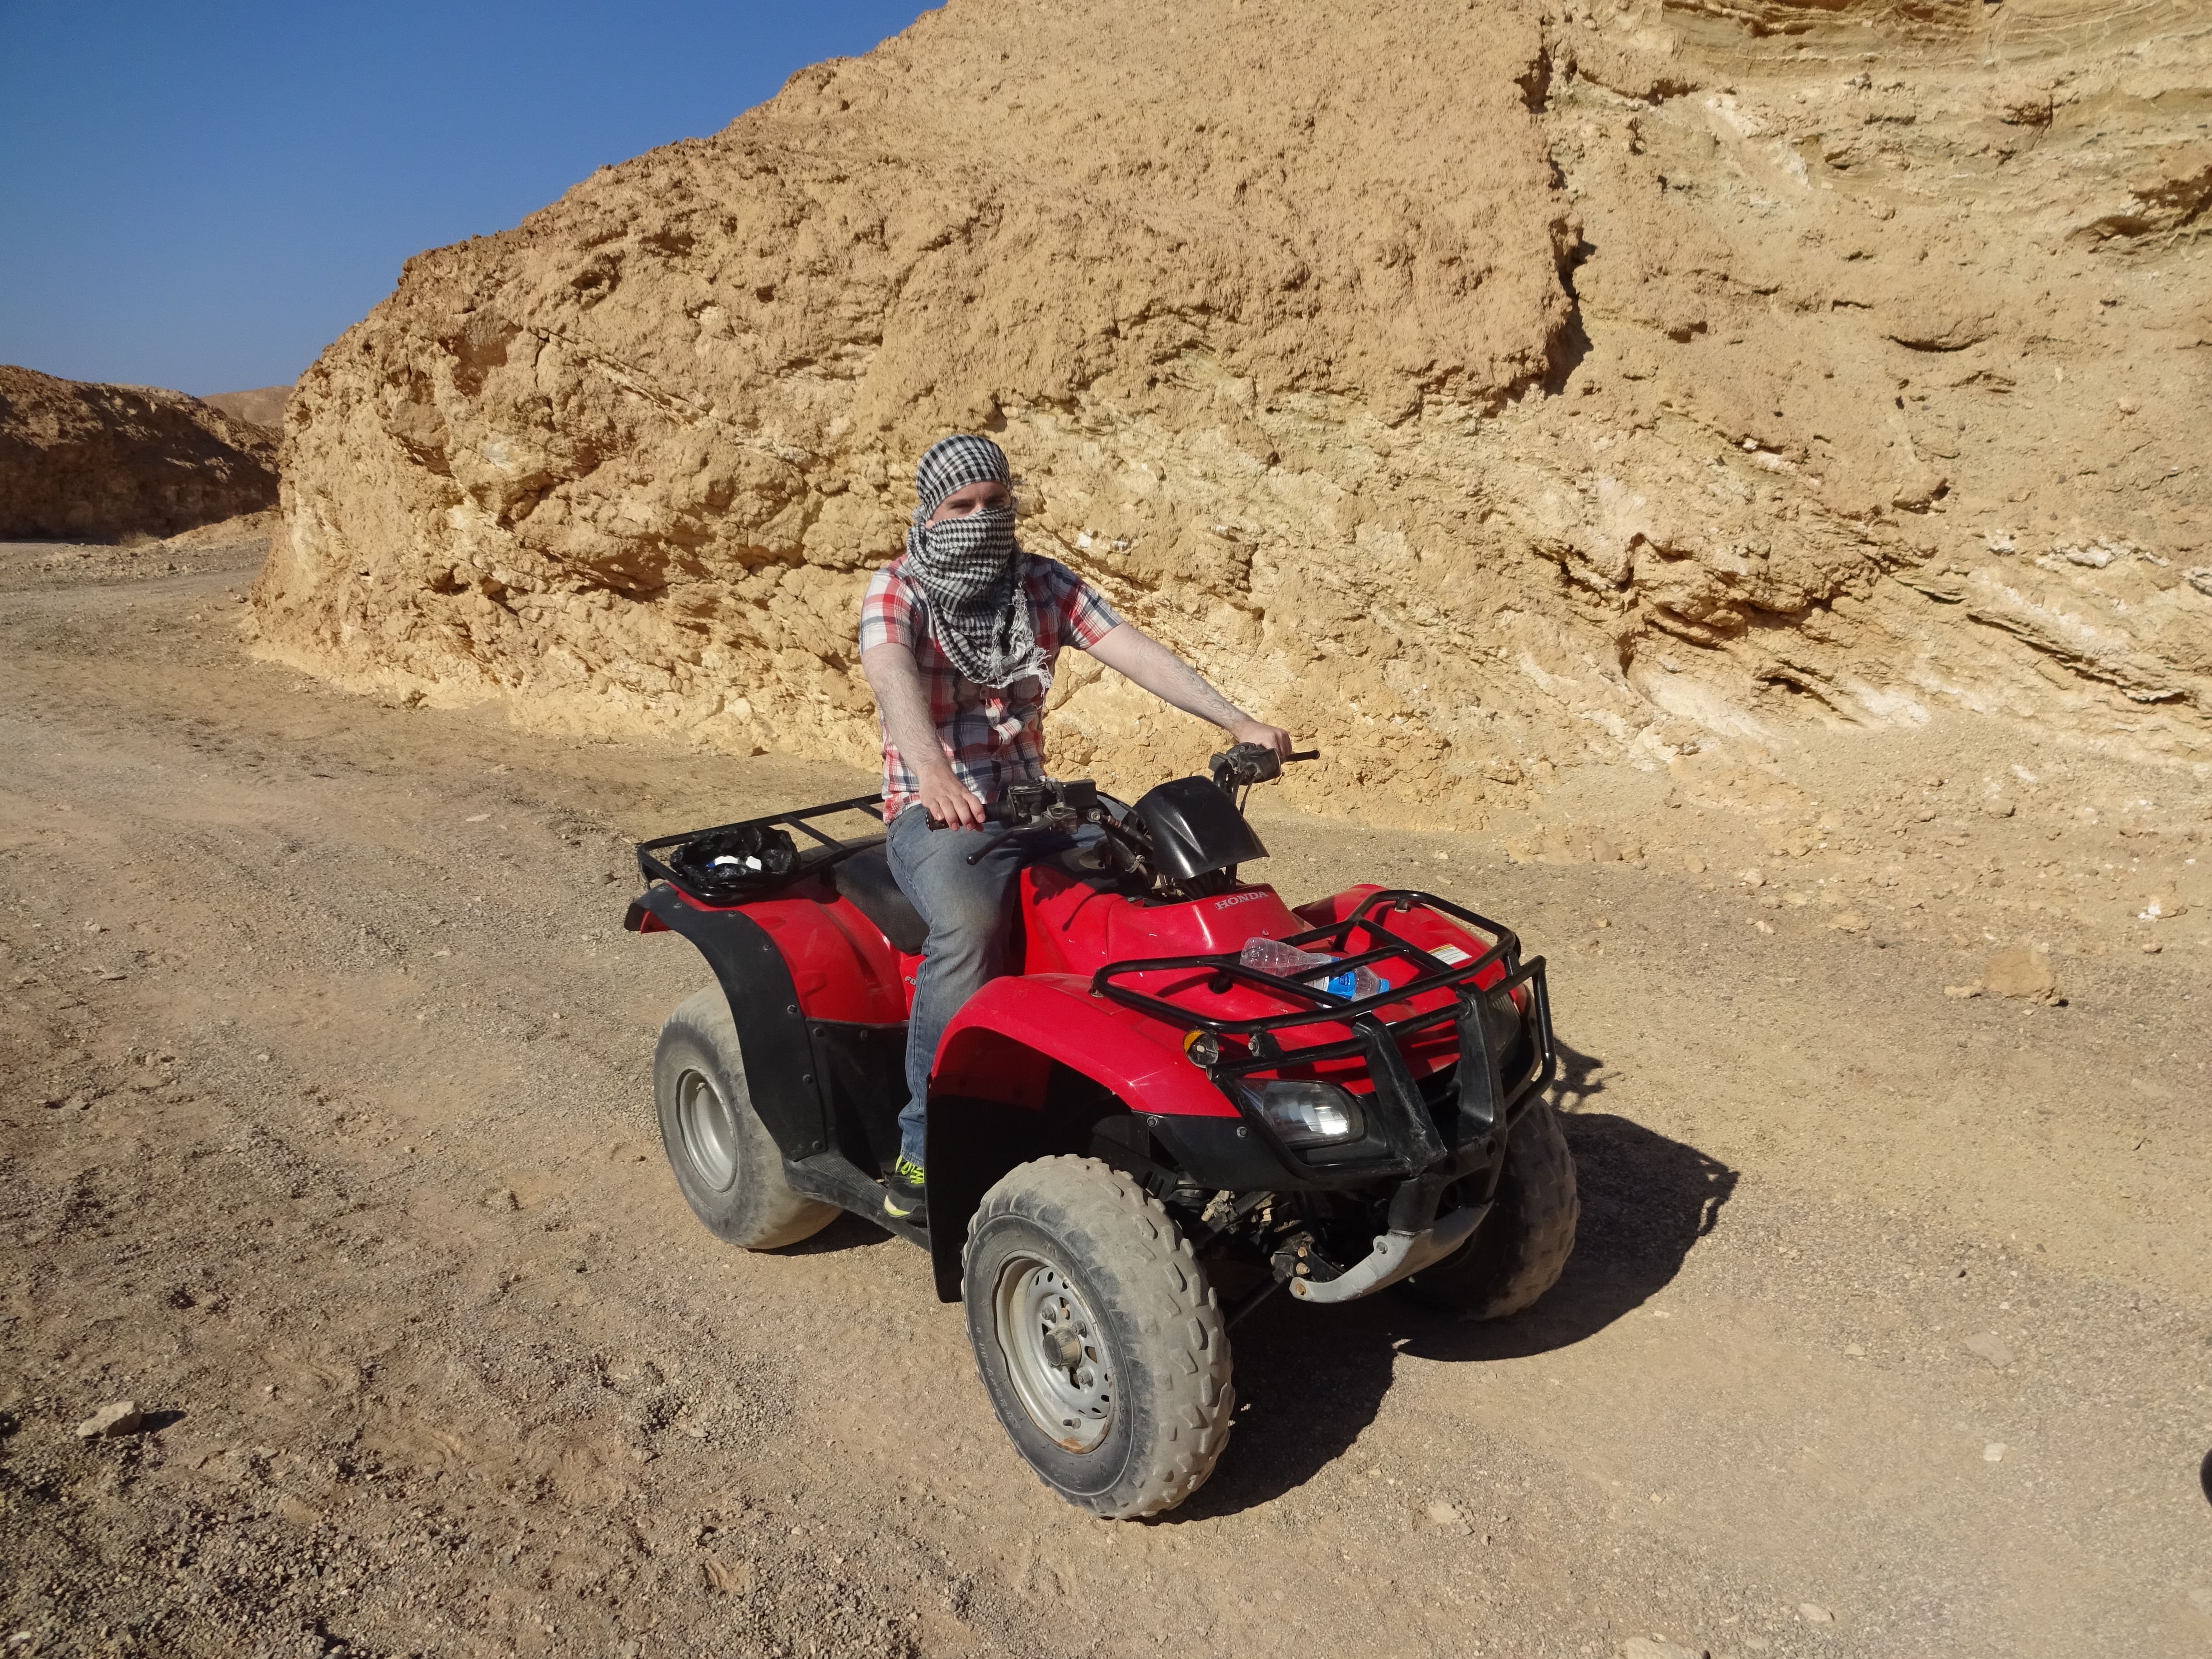 Trip to Egypt – July 2015